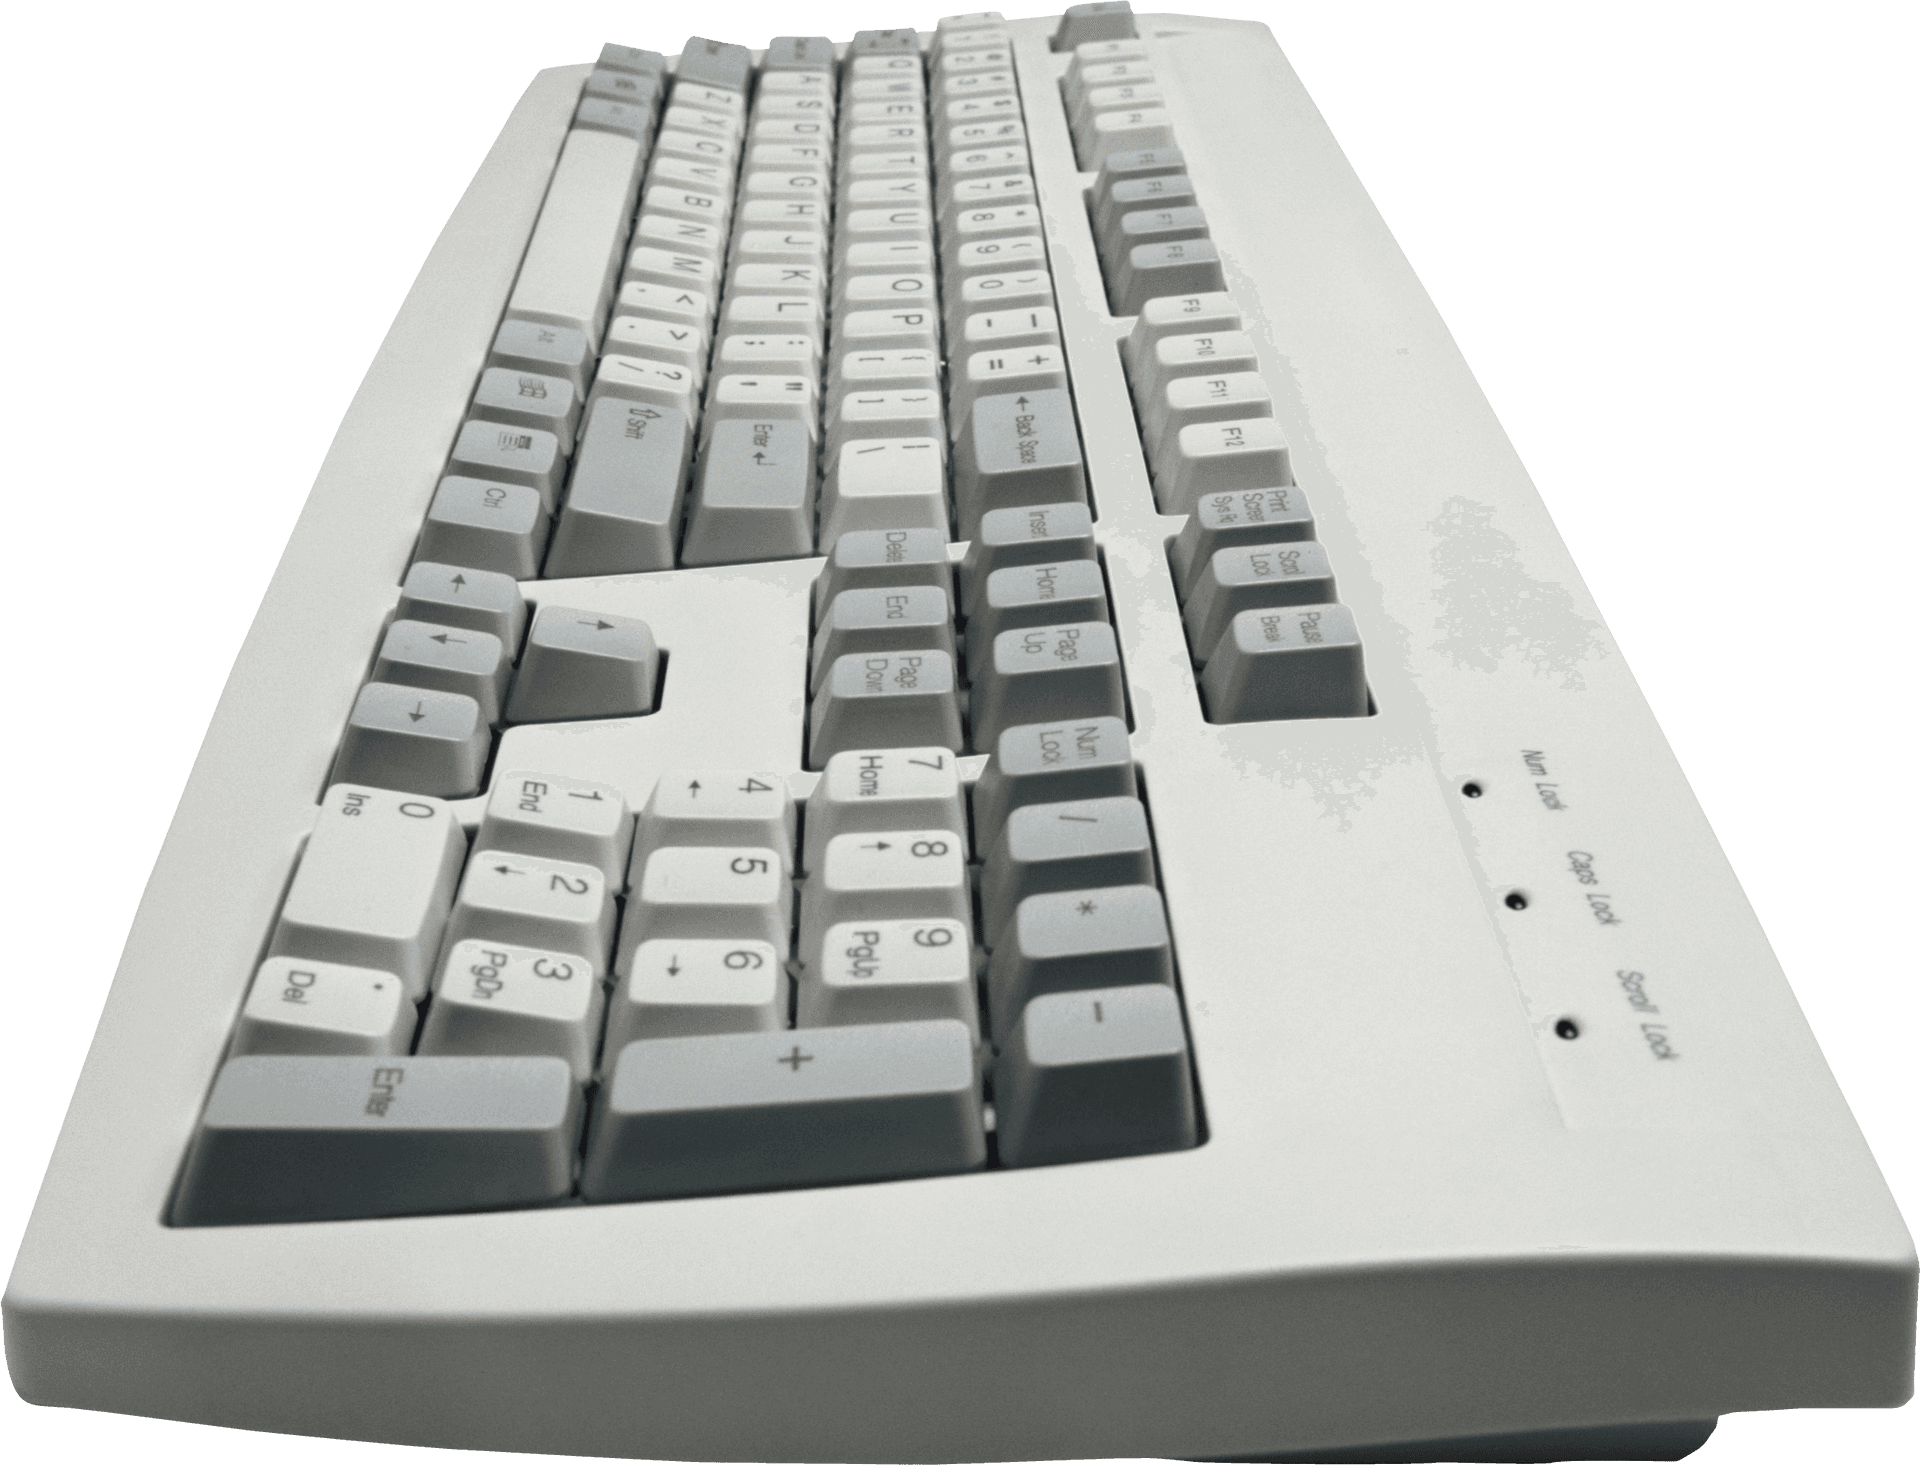 White Mechanical Keyboard Perspective View PNG